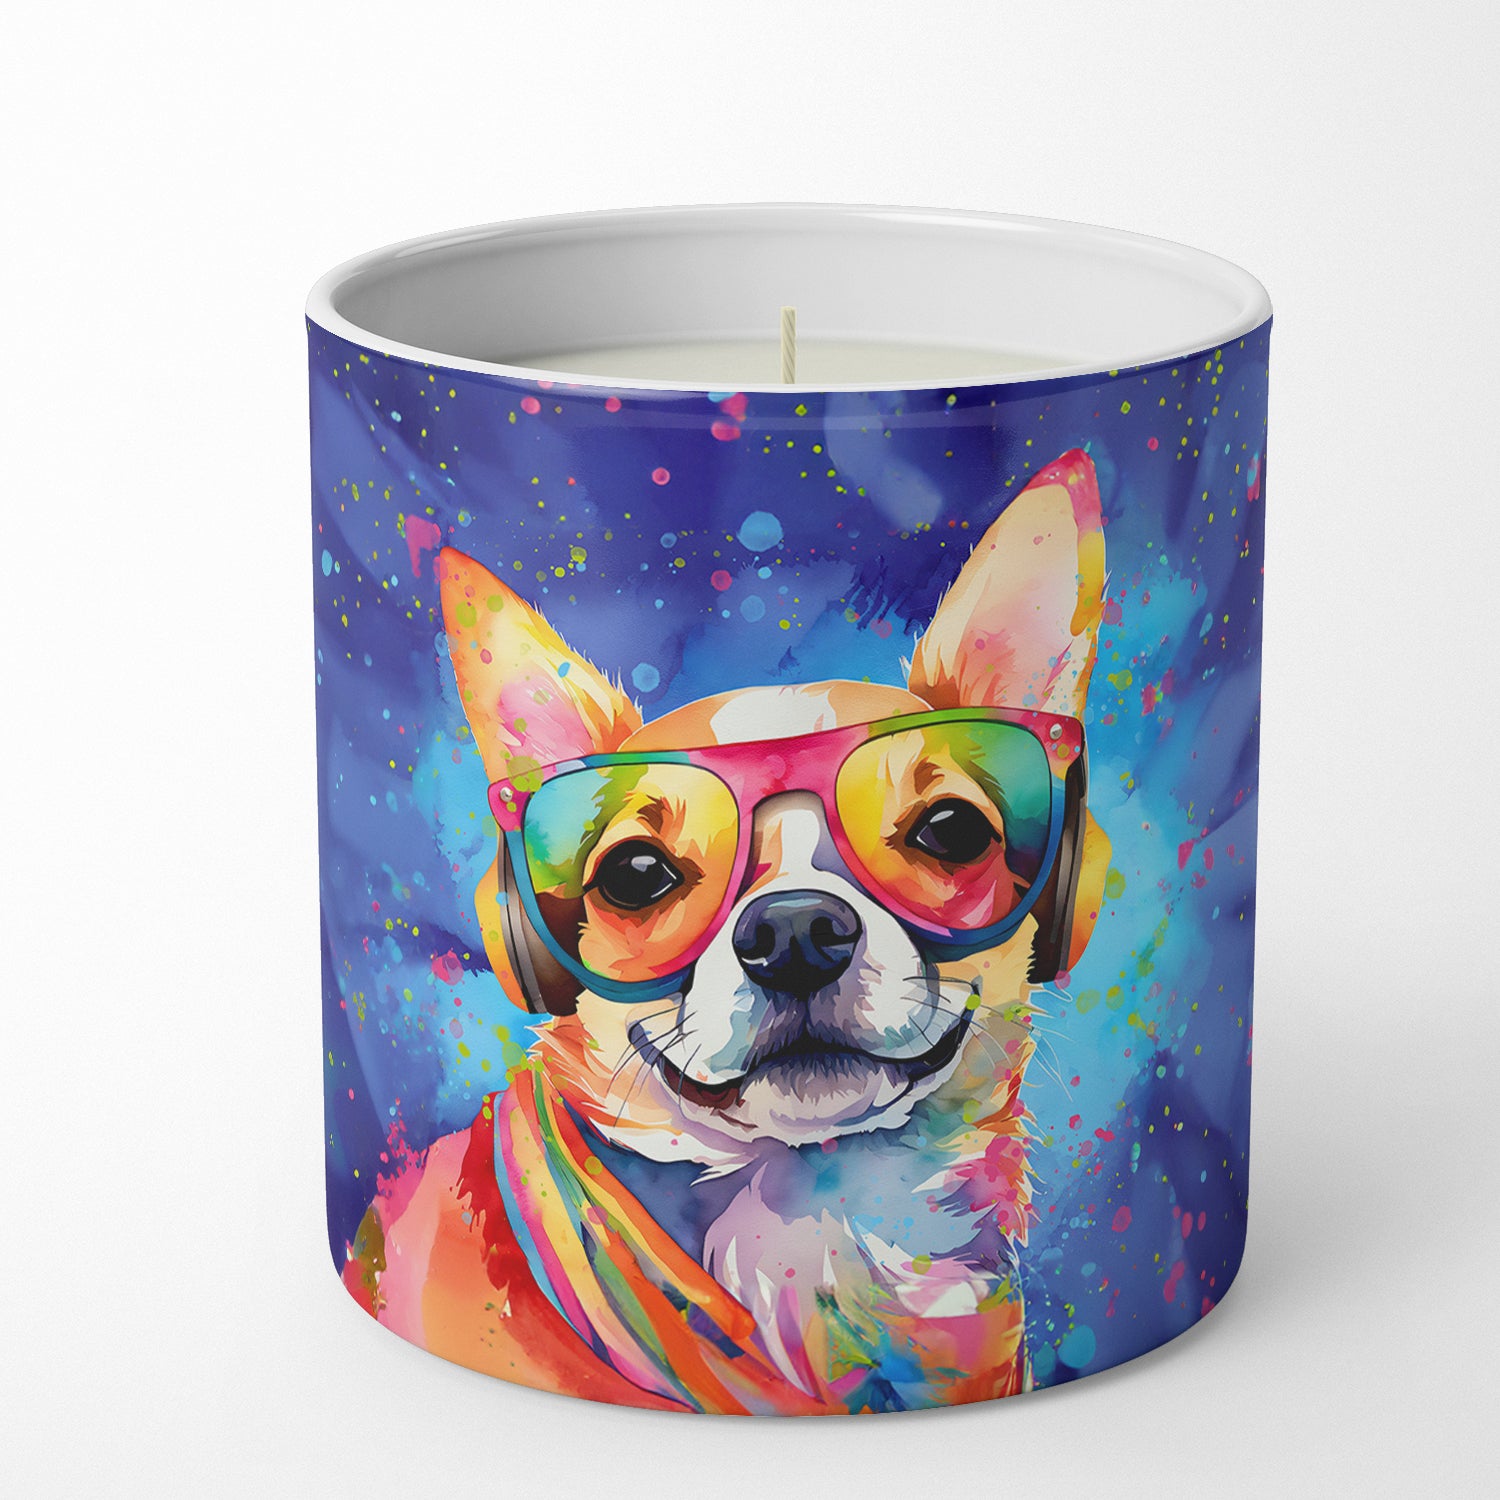 Buy this Chihuahua Hippie Dawg Decorative Soy Candle